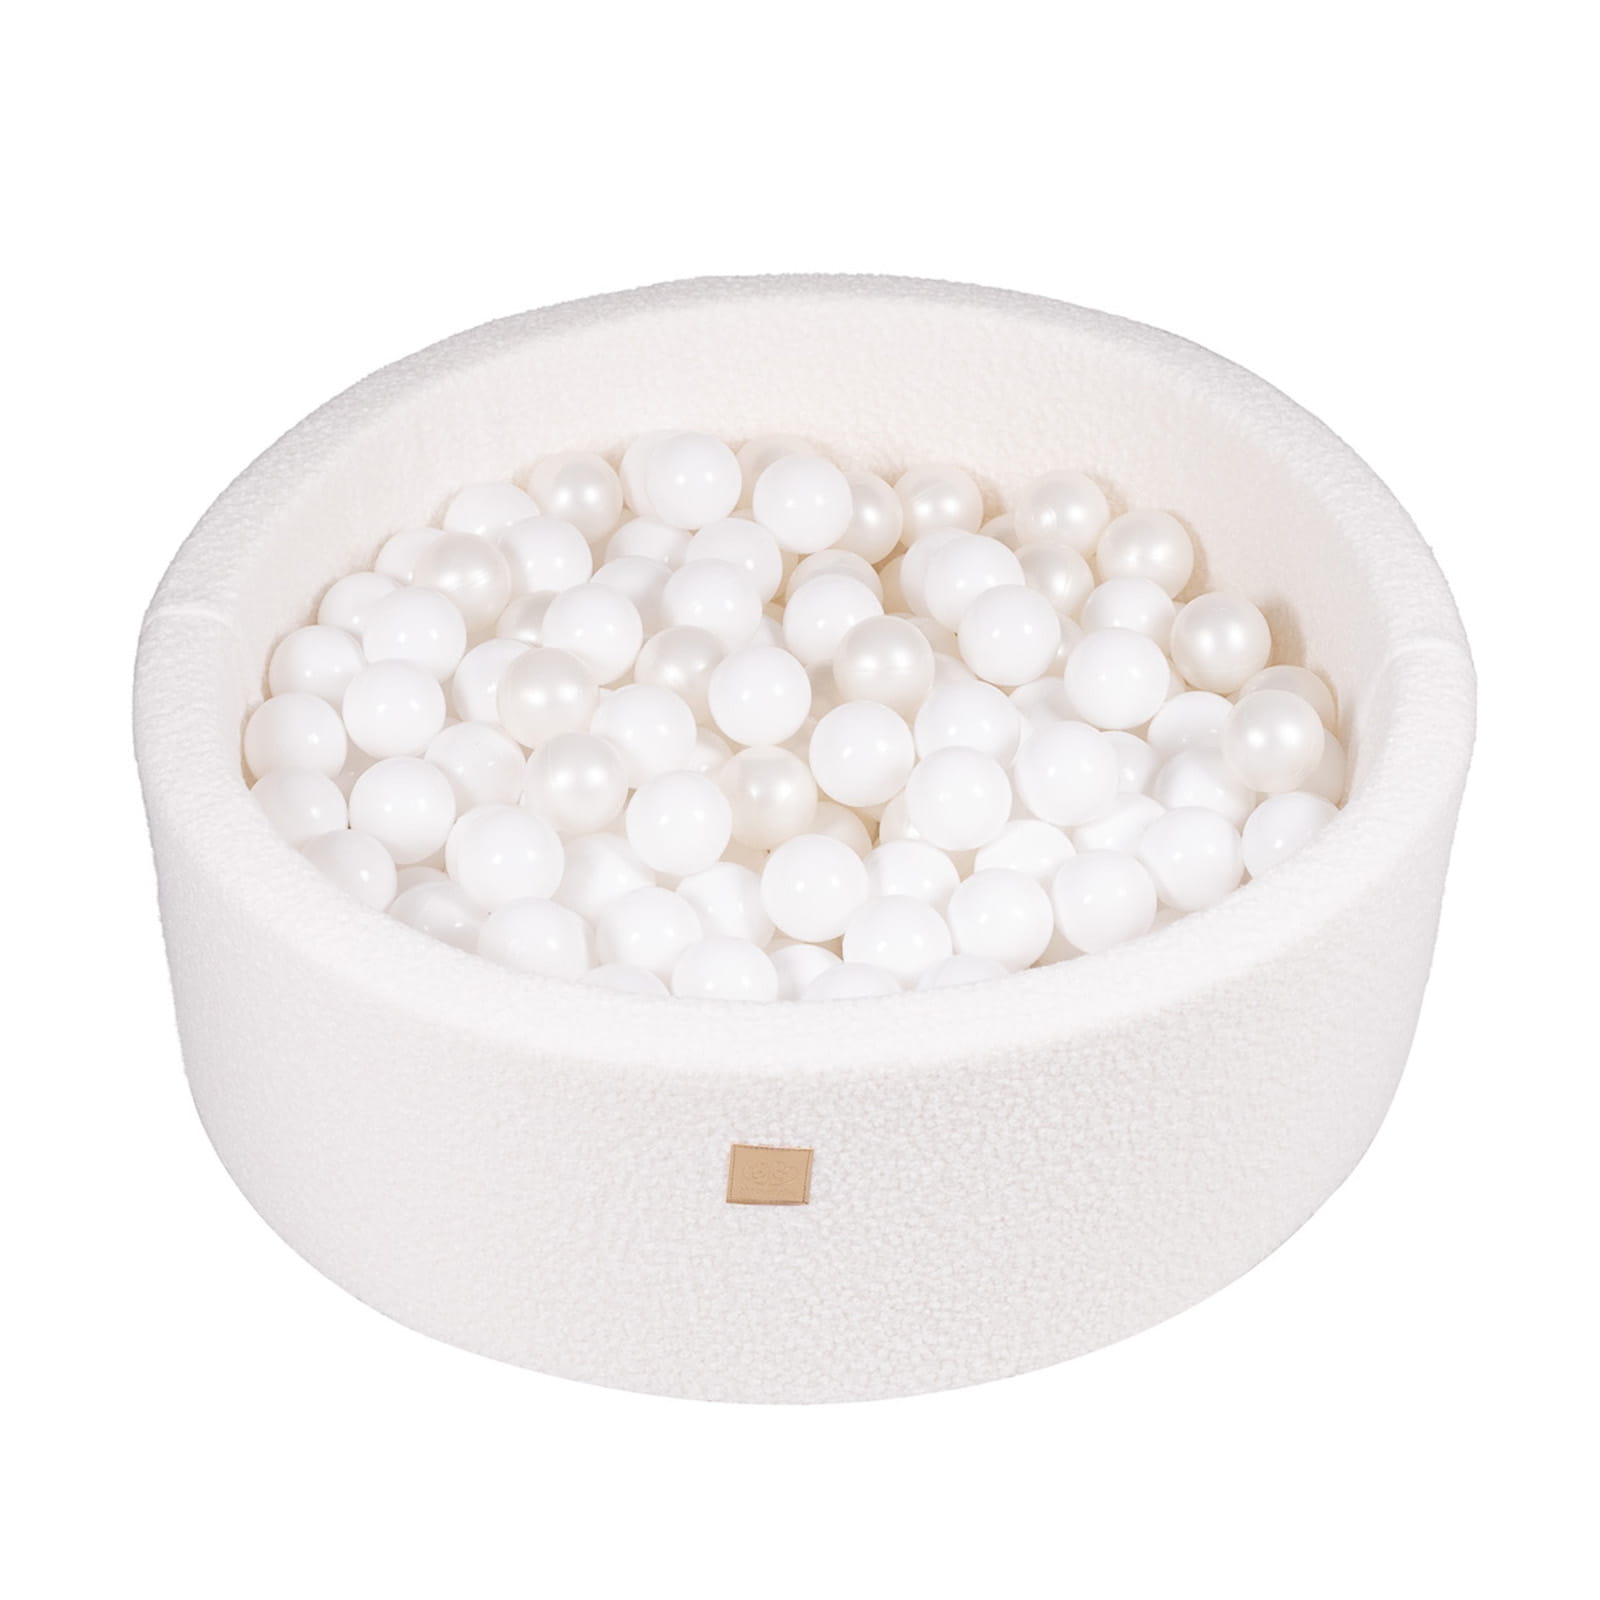 White Ball Pits - Children's Soft Play - 200 Ball Pit Balls Included